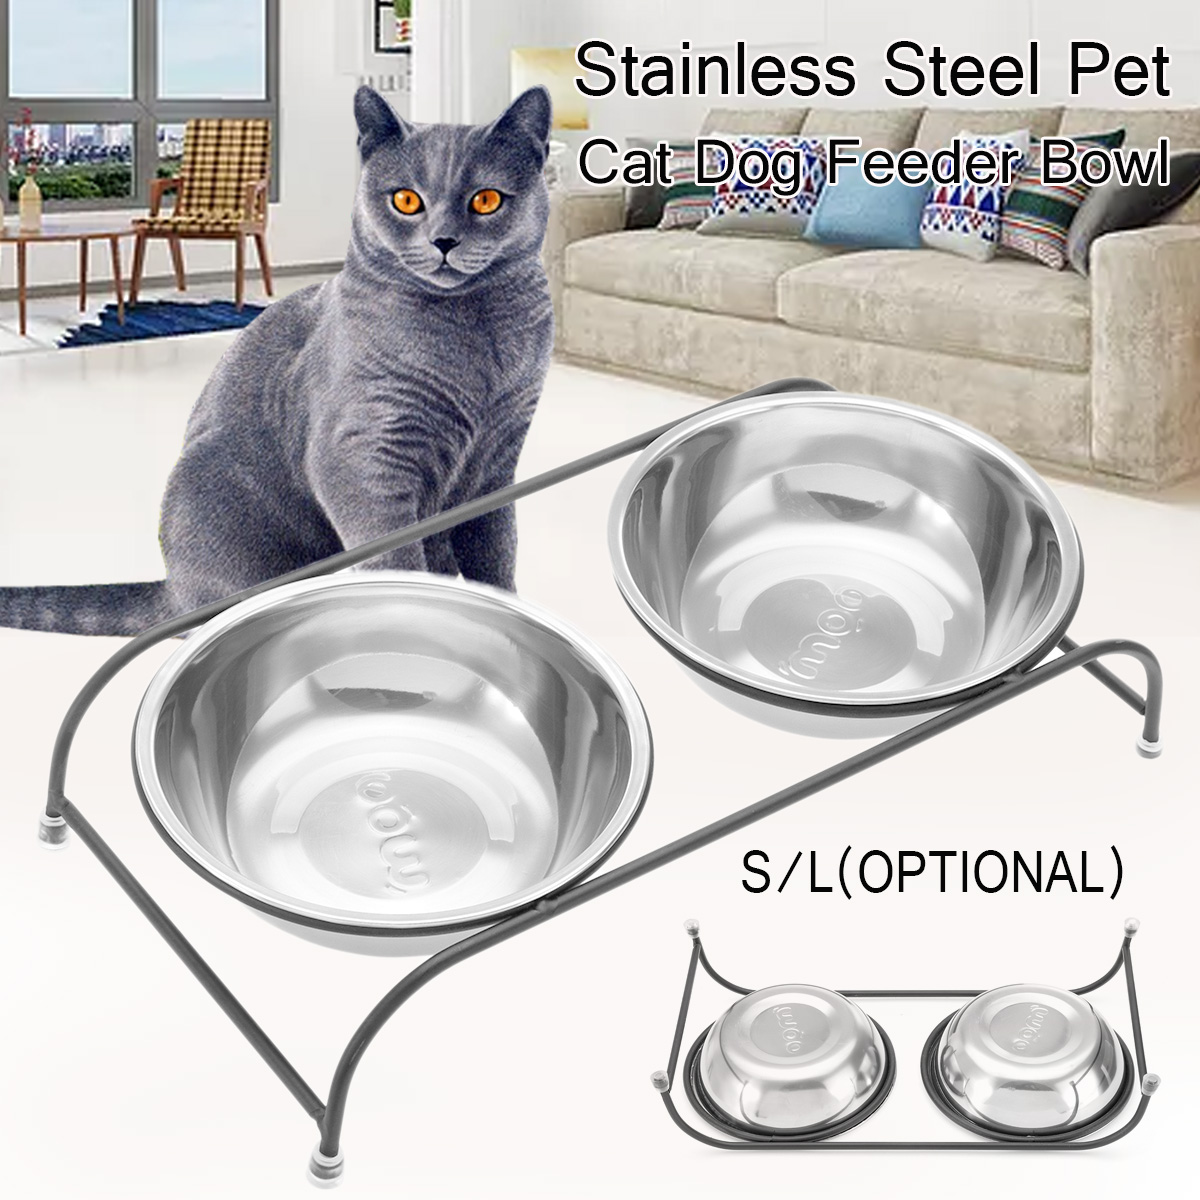 Double-Pet-Bowl-Dish-Dog-Cat-Stand-Feeder-Food-Water-Stainless-Steel-Durable-1453796